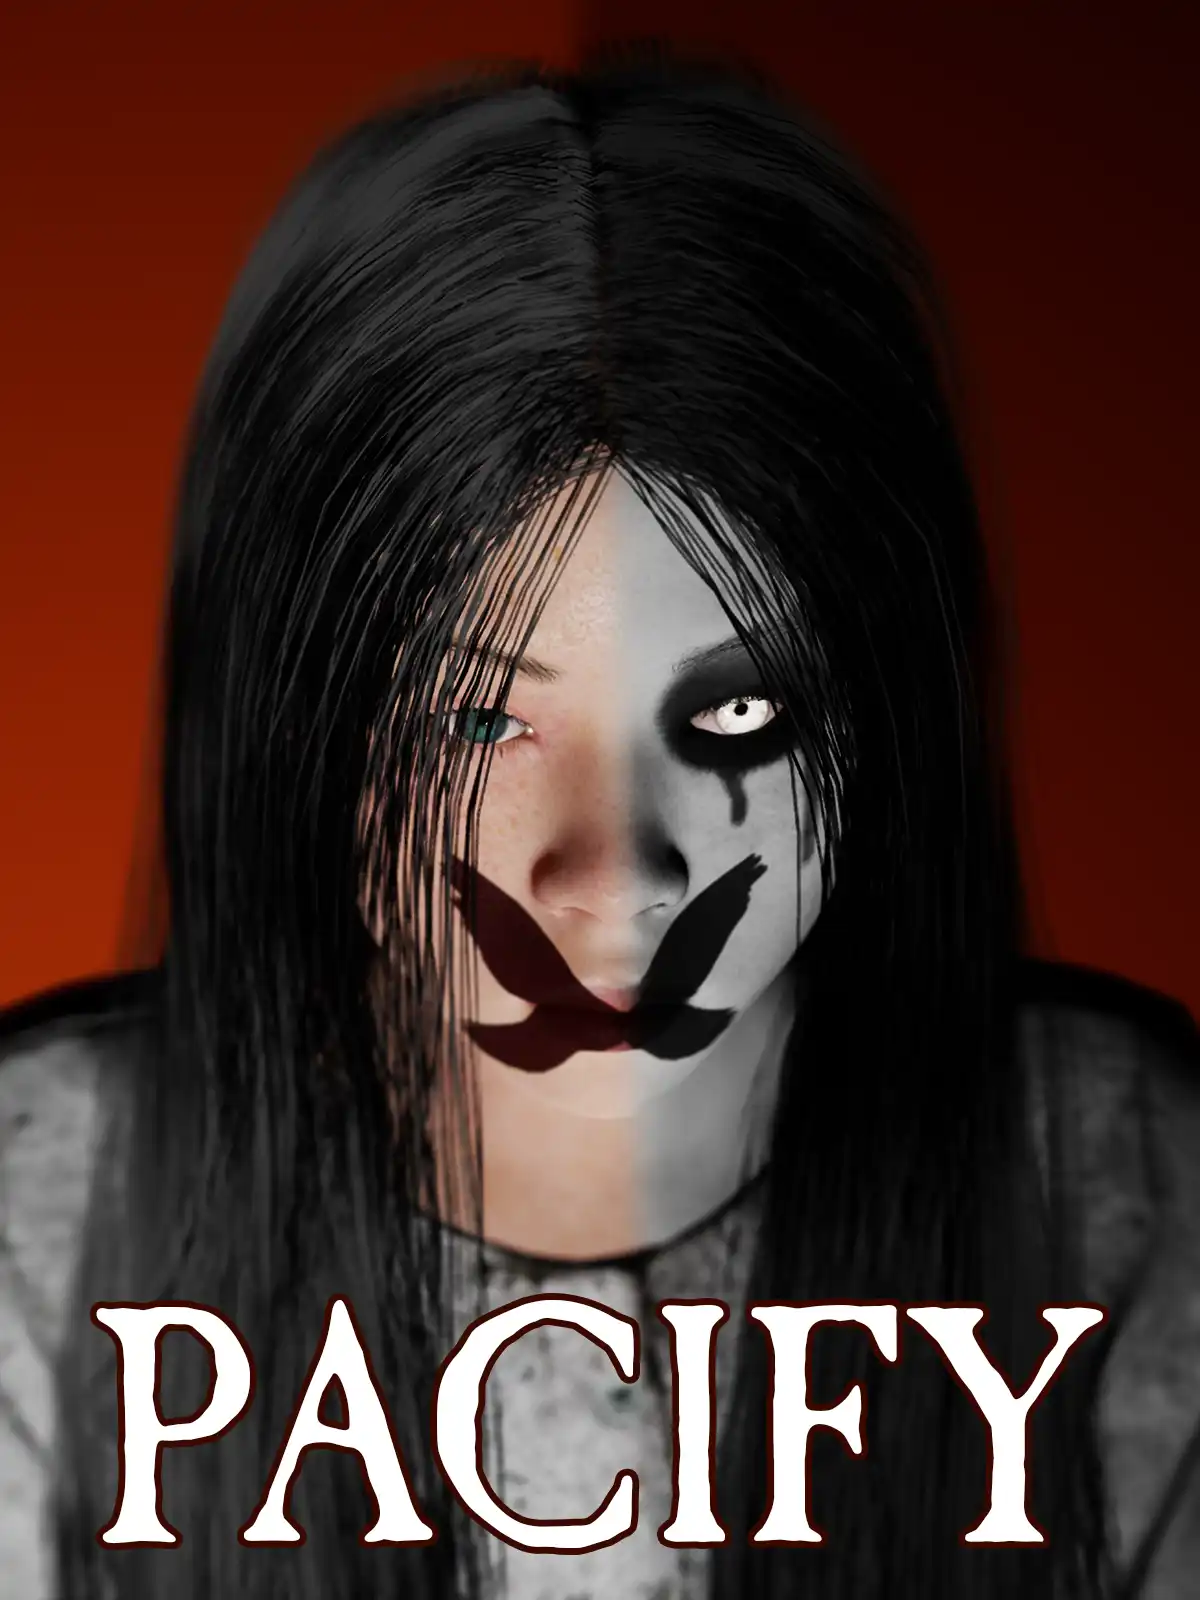 Pacify cover